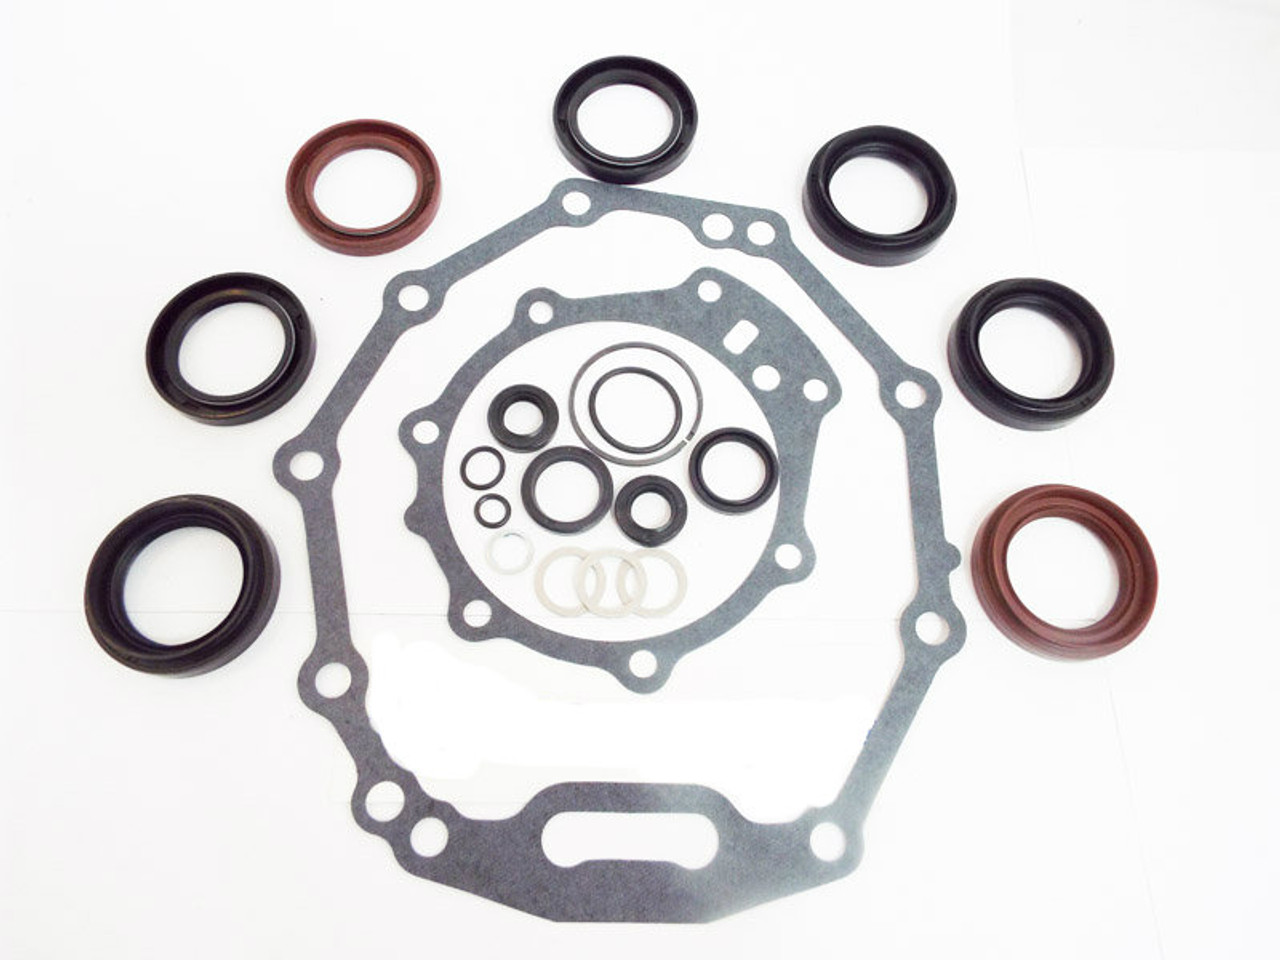 A340H Toyota 4 Runner (1992-2002) Tacoma (1995-2002) Tundra (1999-2002) Sequoia (2000-2002) T100 (1993-1998) Transfer Case Seal & Gasket Overhaul Kit